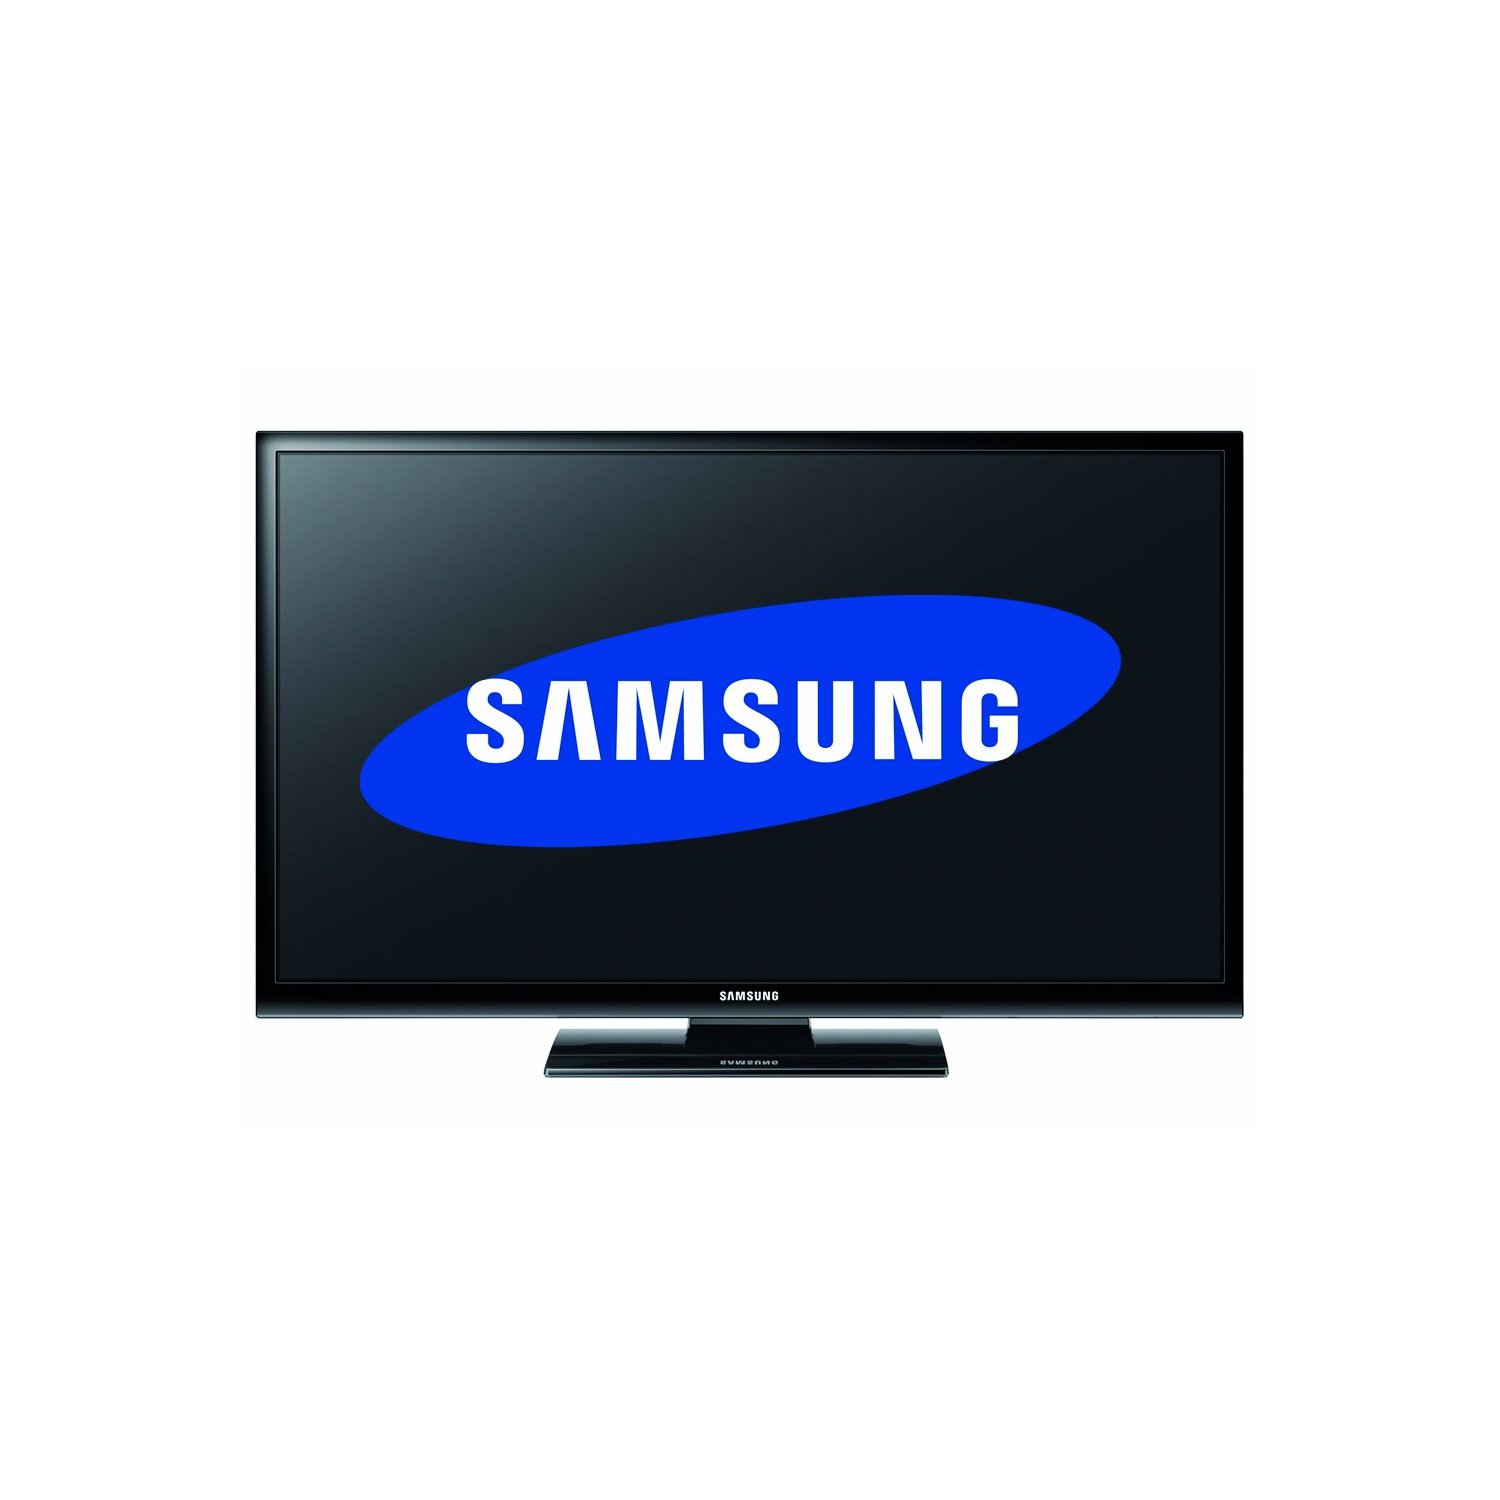 Hot Price Samsung PS51E450 51-inch Widescreen HD Ready Plasma TV with Freeview (New for 2012)  รูปที่ 1